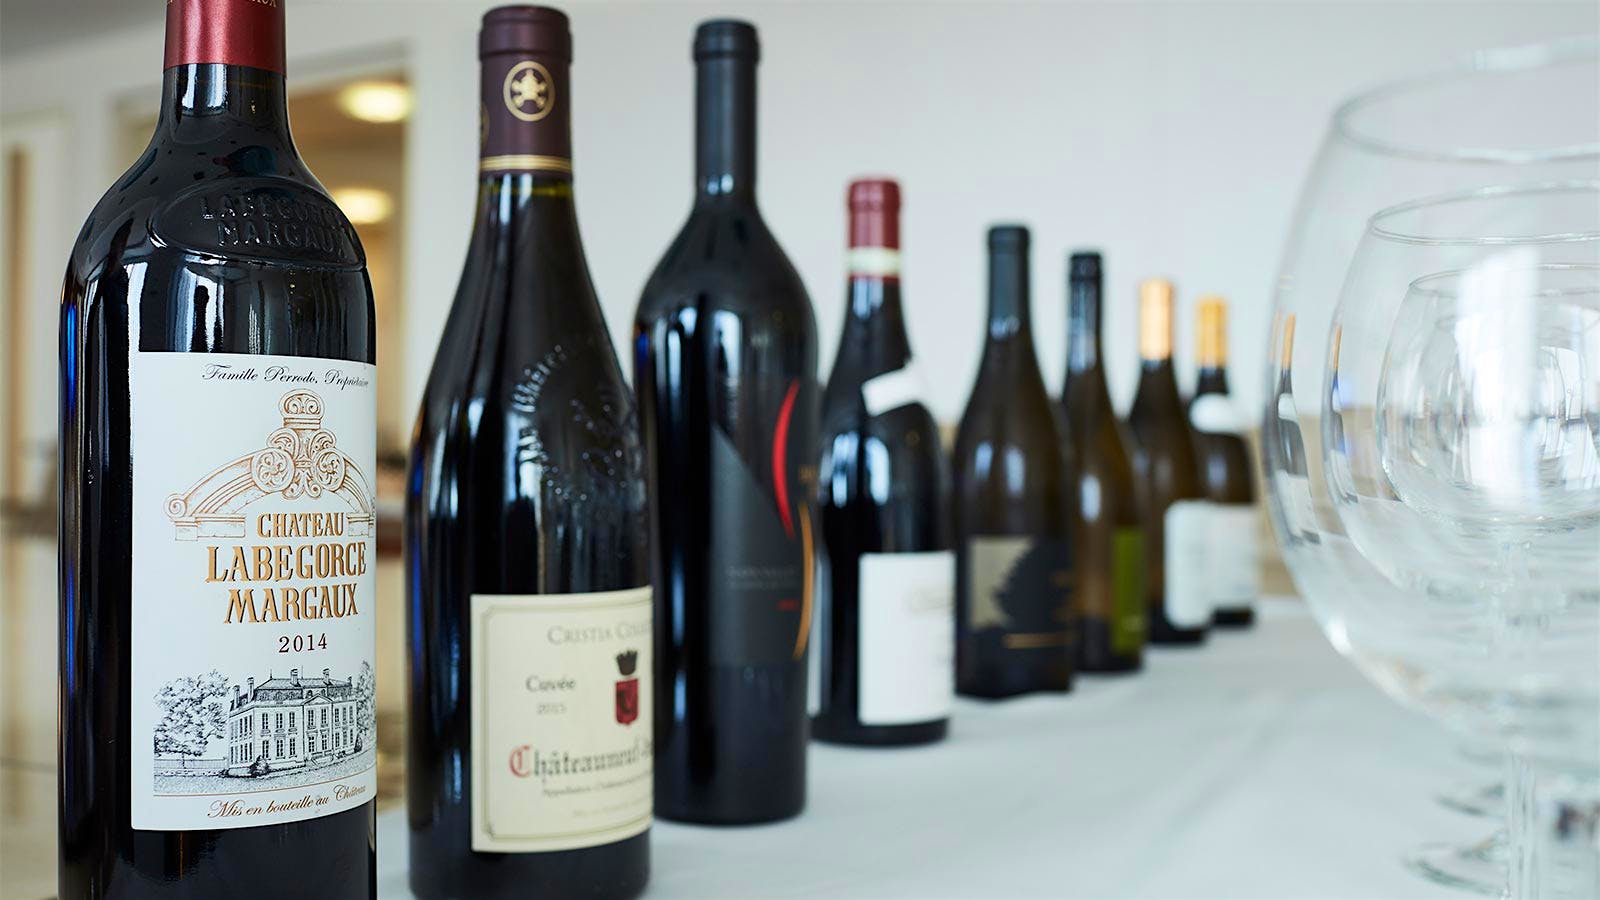 A collection of wine bottles to be shared includes Bordeaux and Châteauneuf-du-Pape reds.